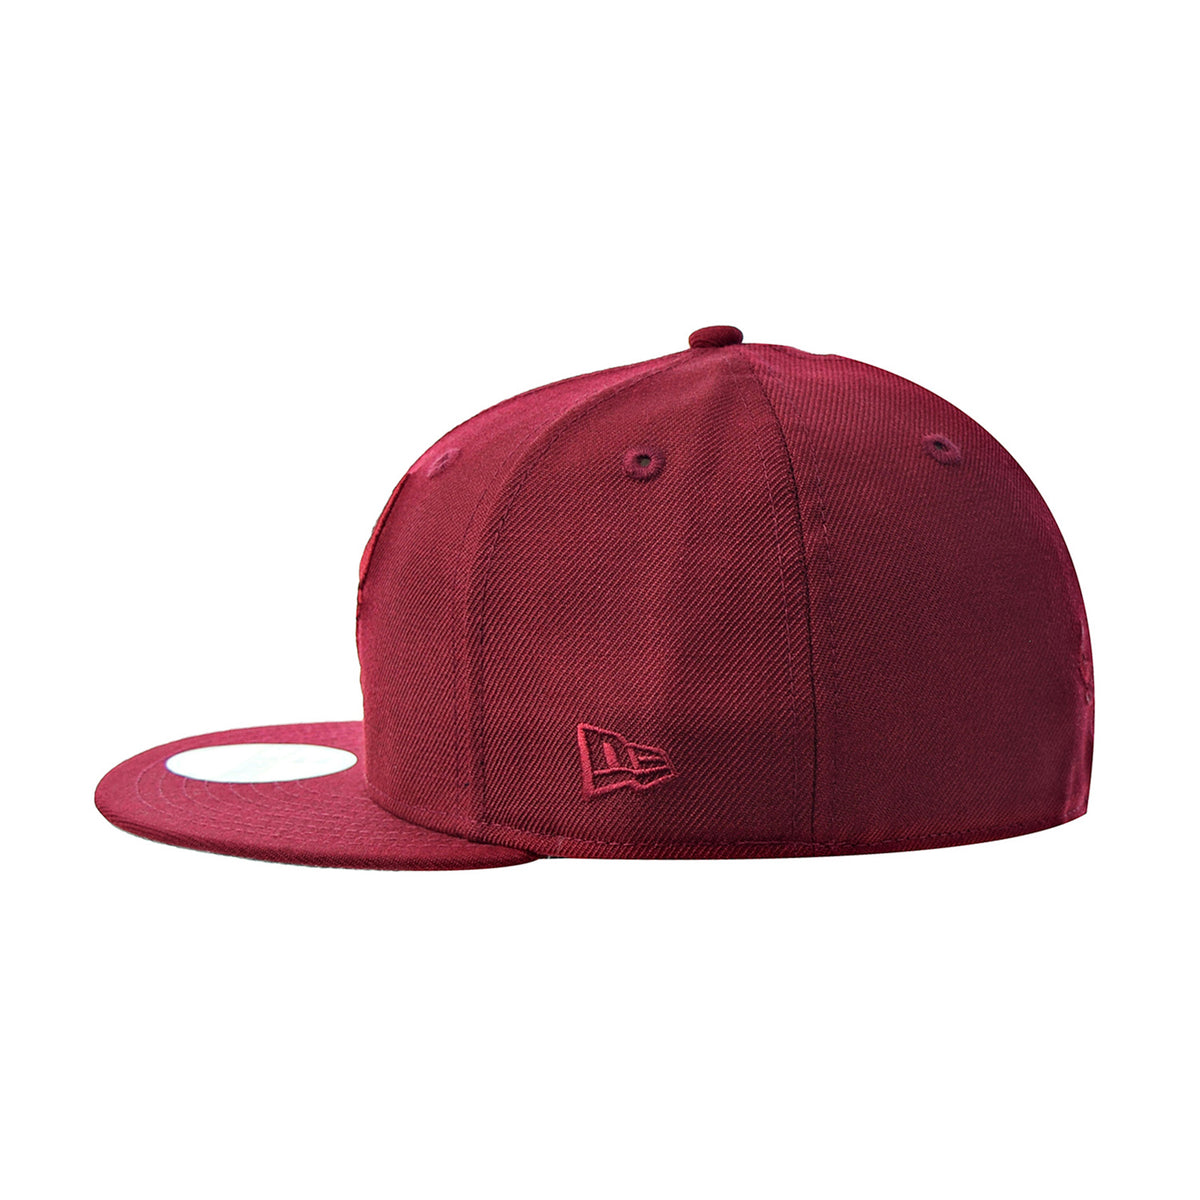 New Era 59FIFTY-BLANK Solid Burgundy Fitted Hat